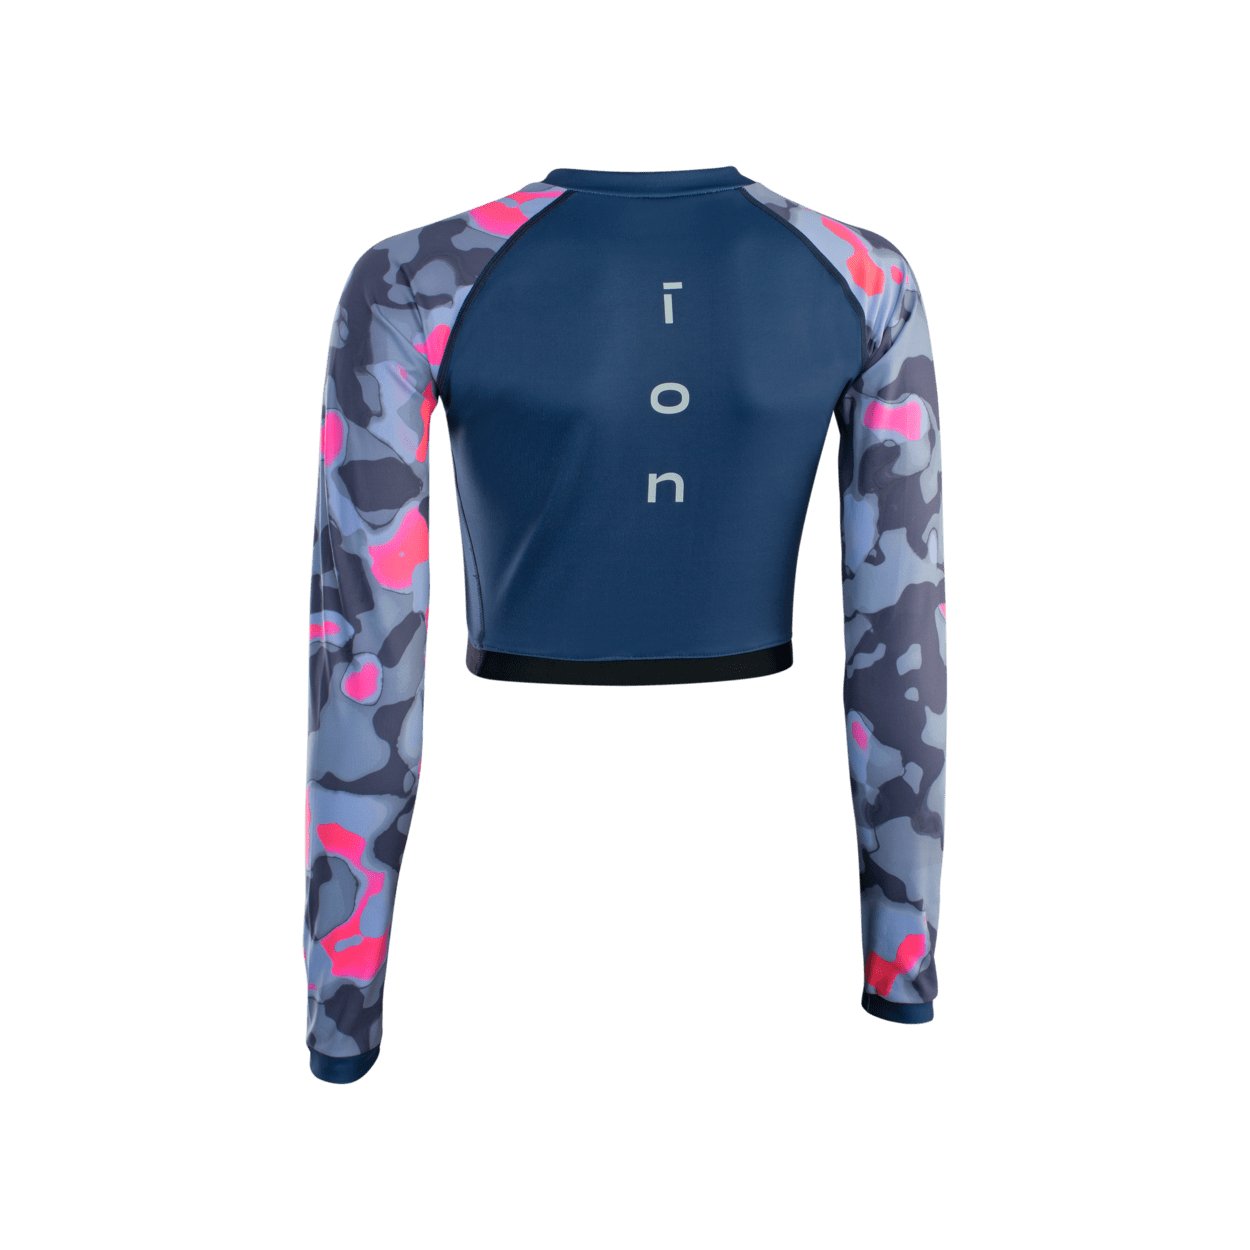 ION Shorty Rashguard LS 2022 - Worthing Watersports - 9010583052397 - Tops - ION Water